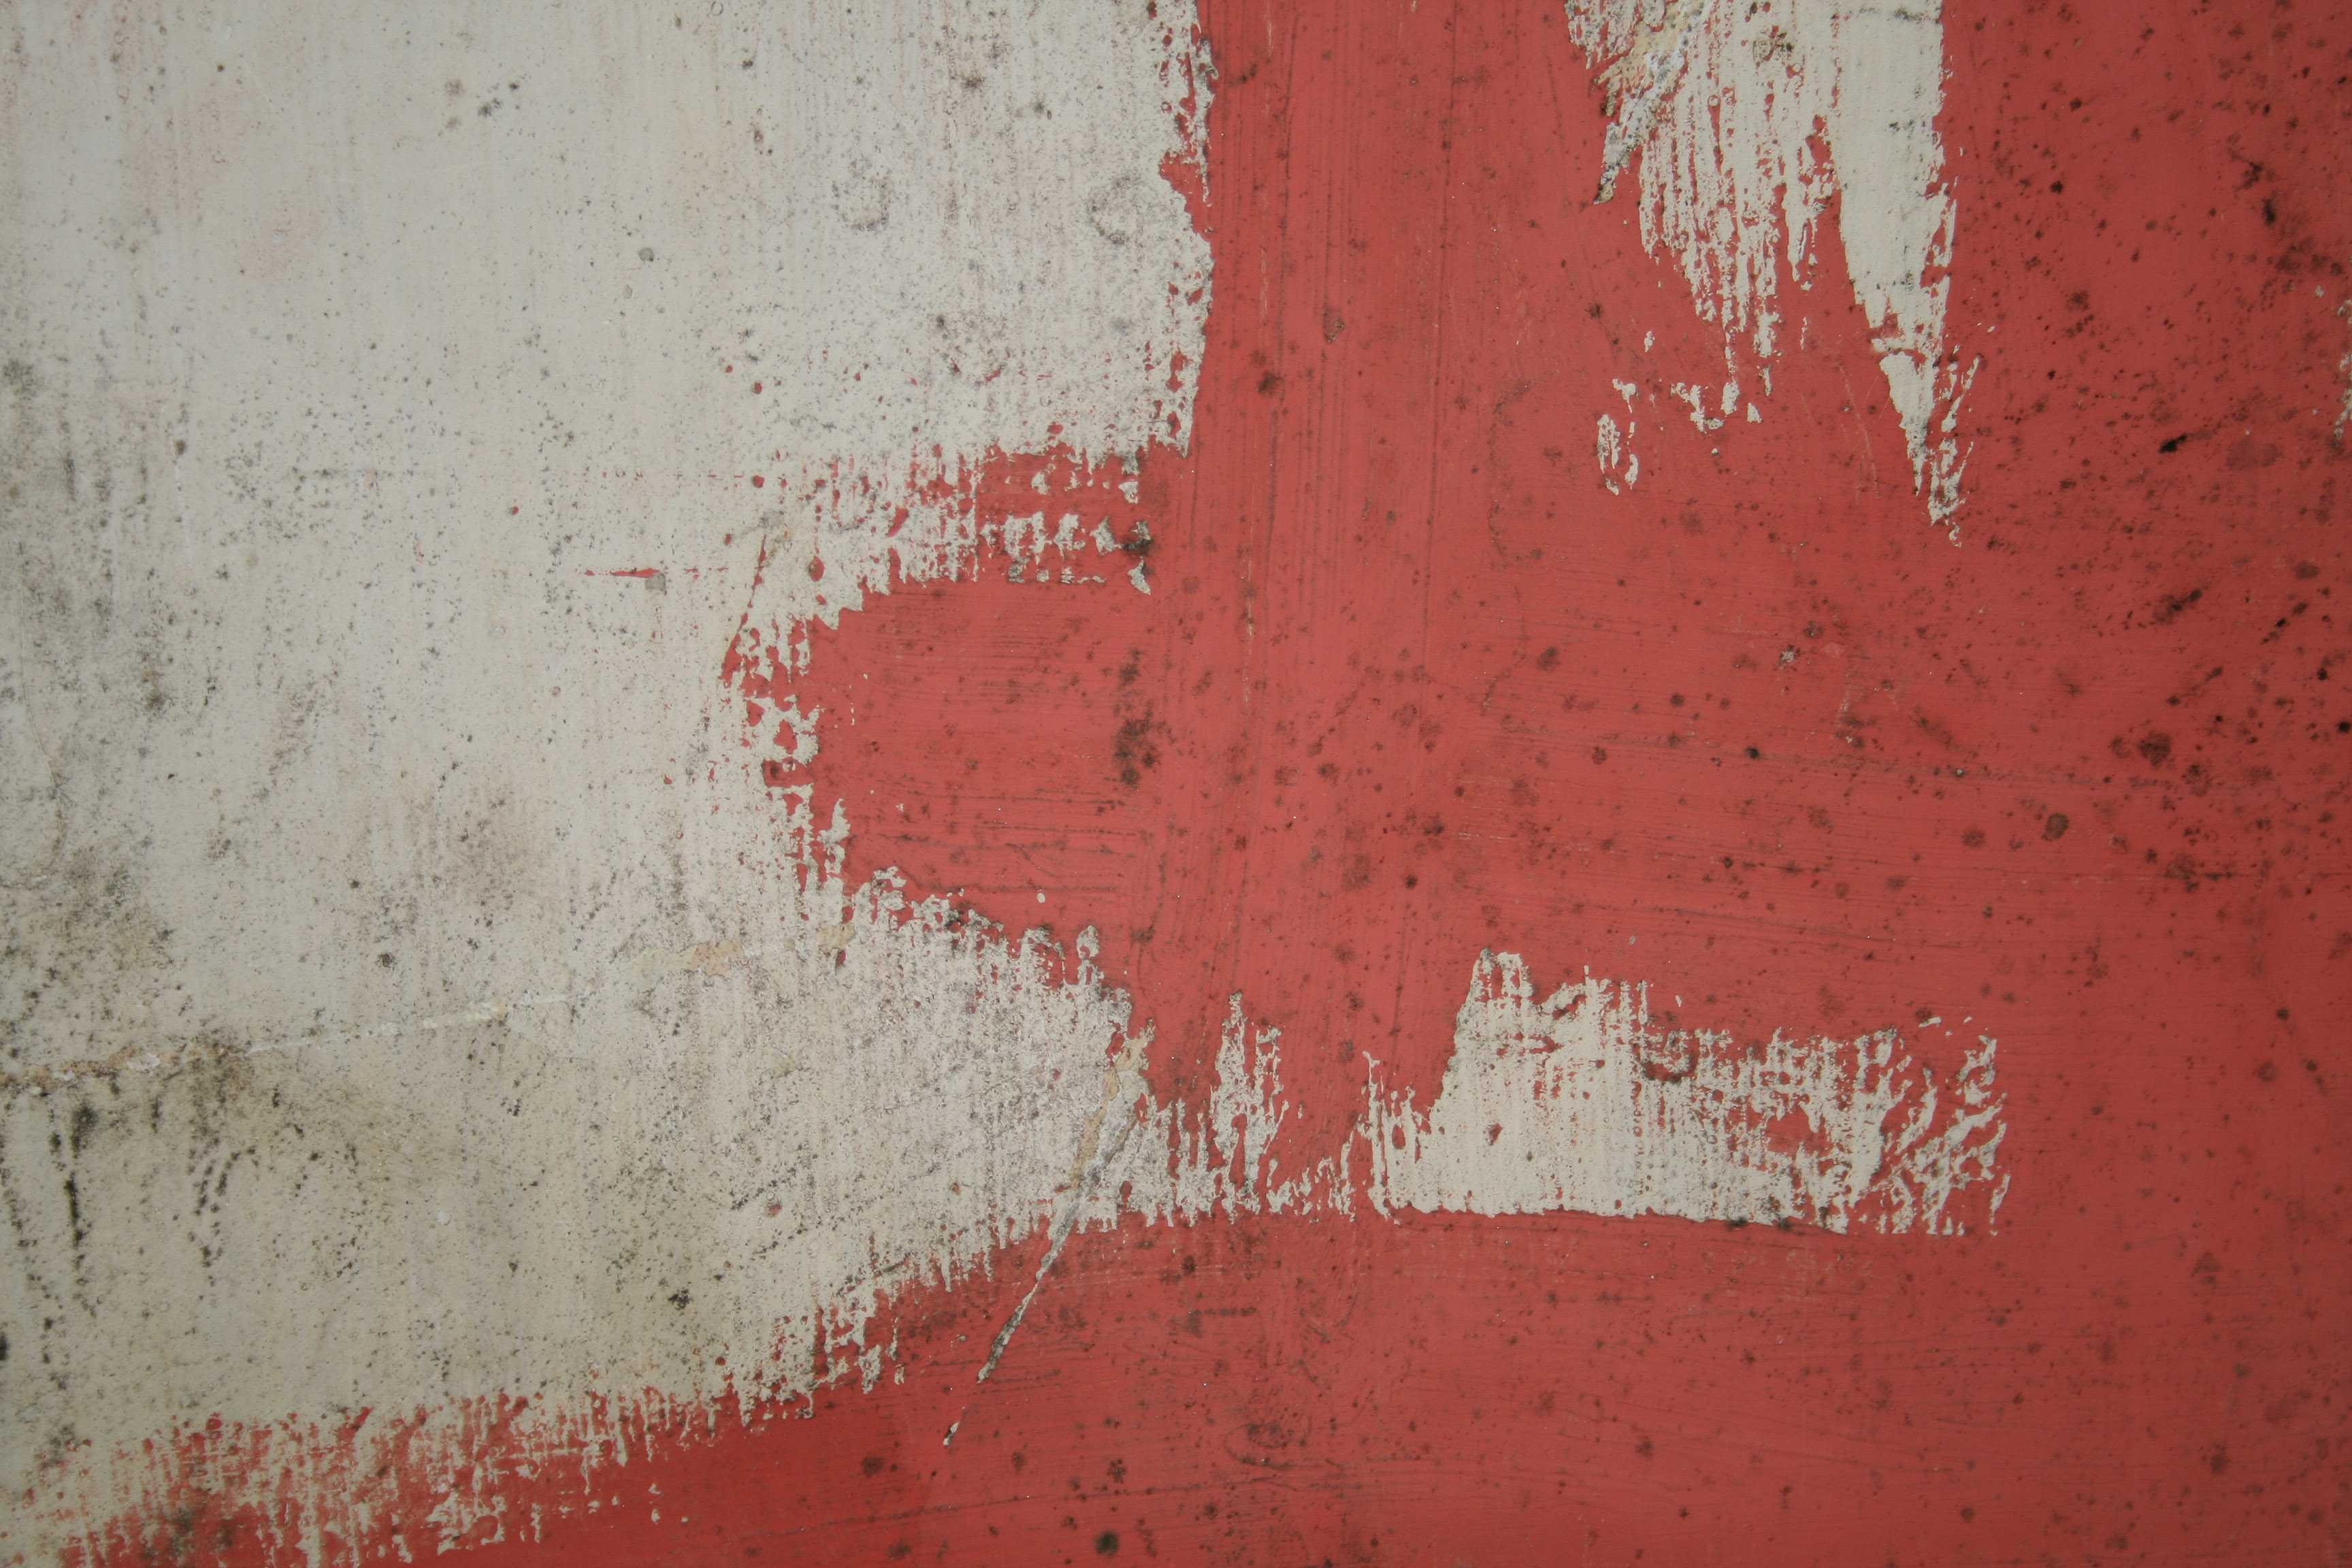 Dirty Wall With Red Paint Textures For Photoshop Free